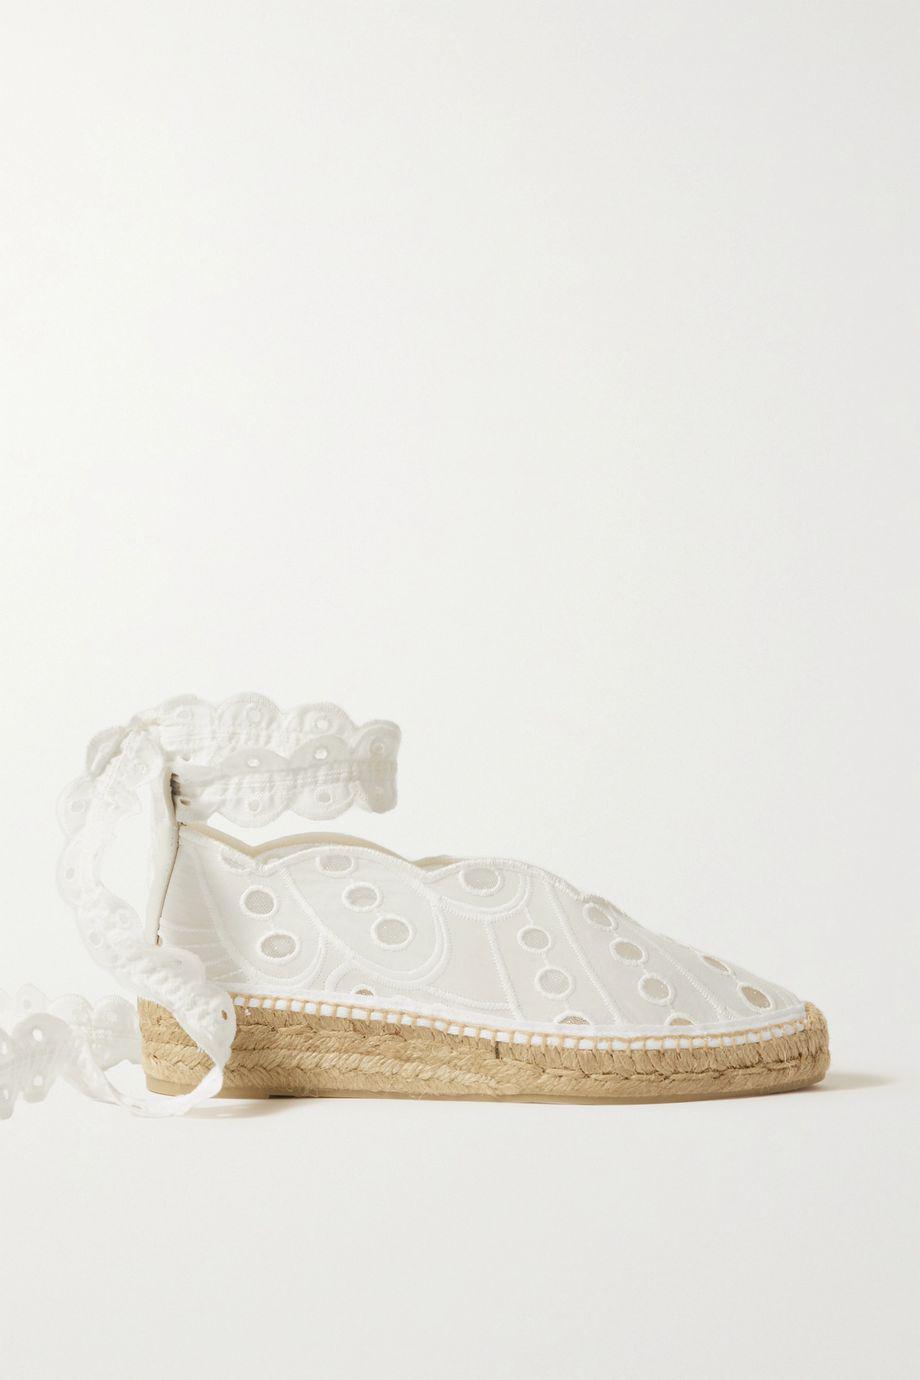 + Charo Ruiz Gea broderie anglaise cotton espadrilles by CASTANER